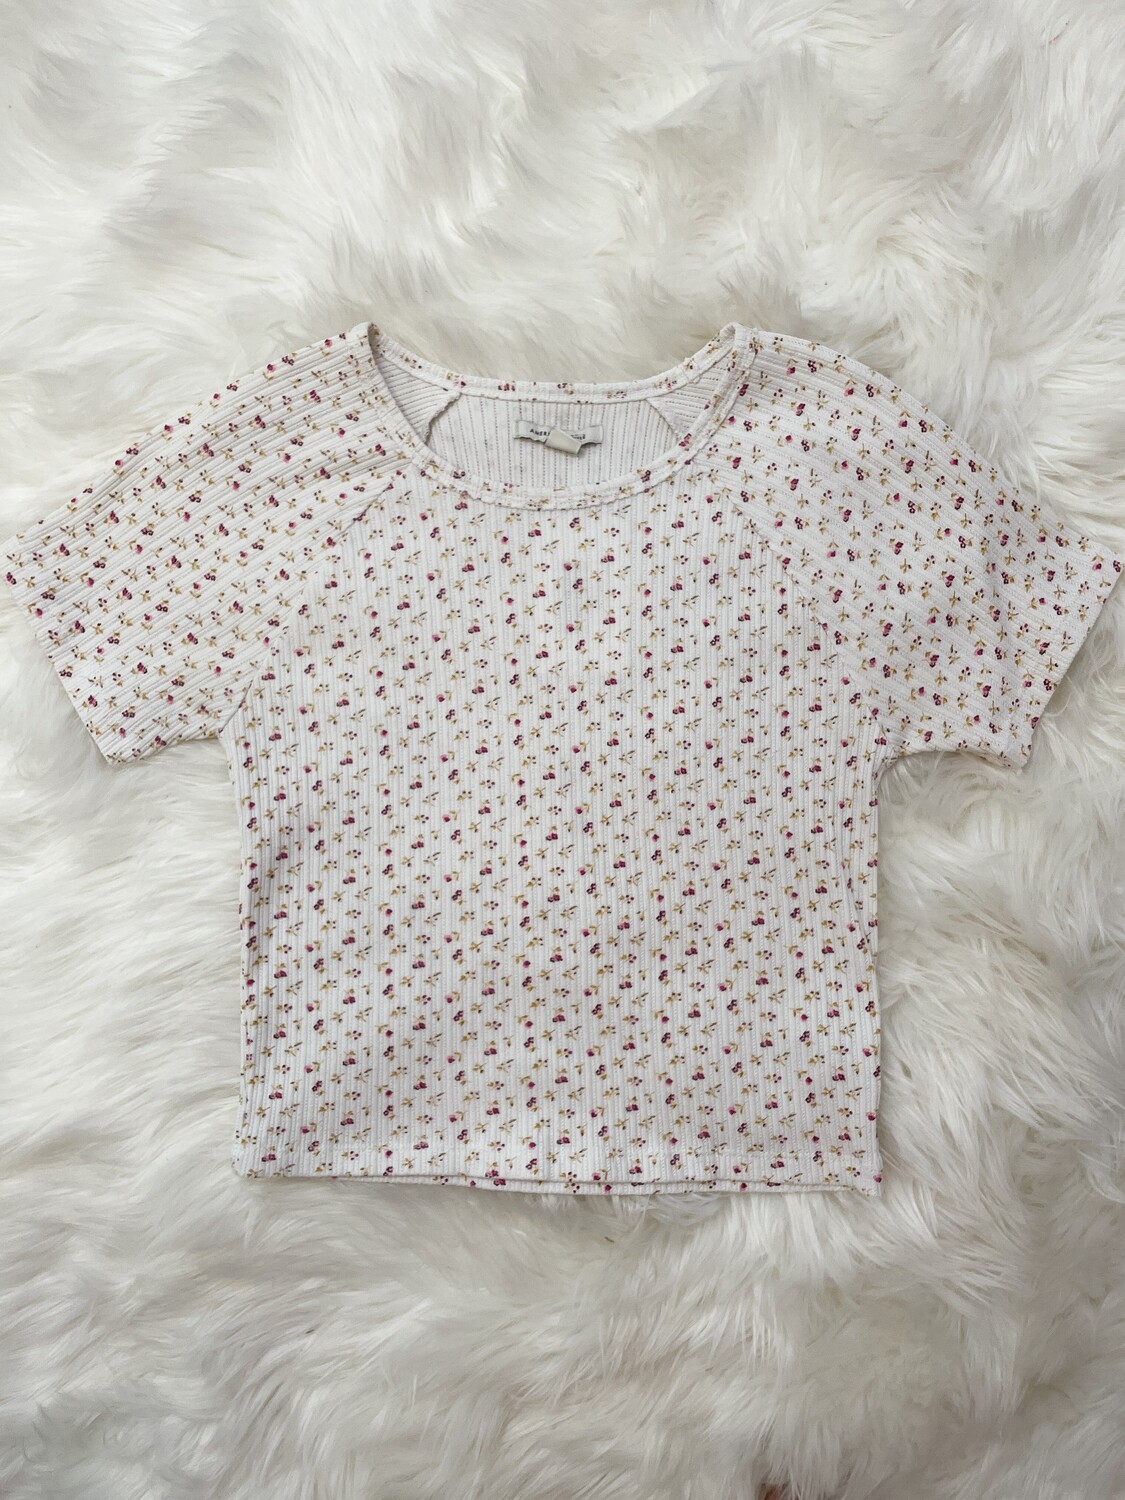 American Eagle White Floral Top - M